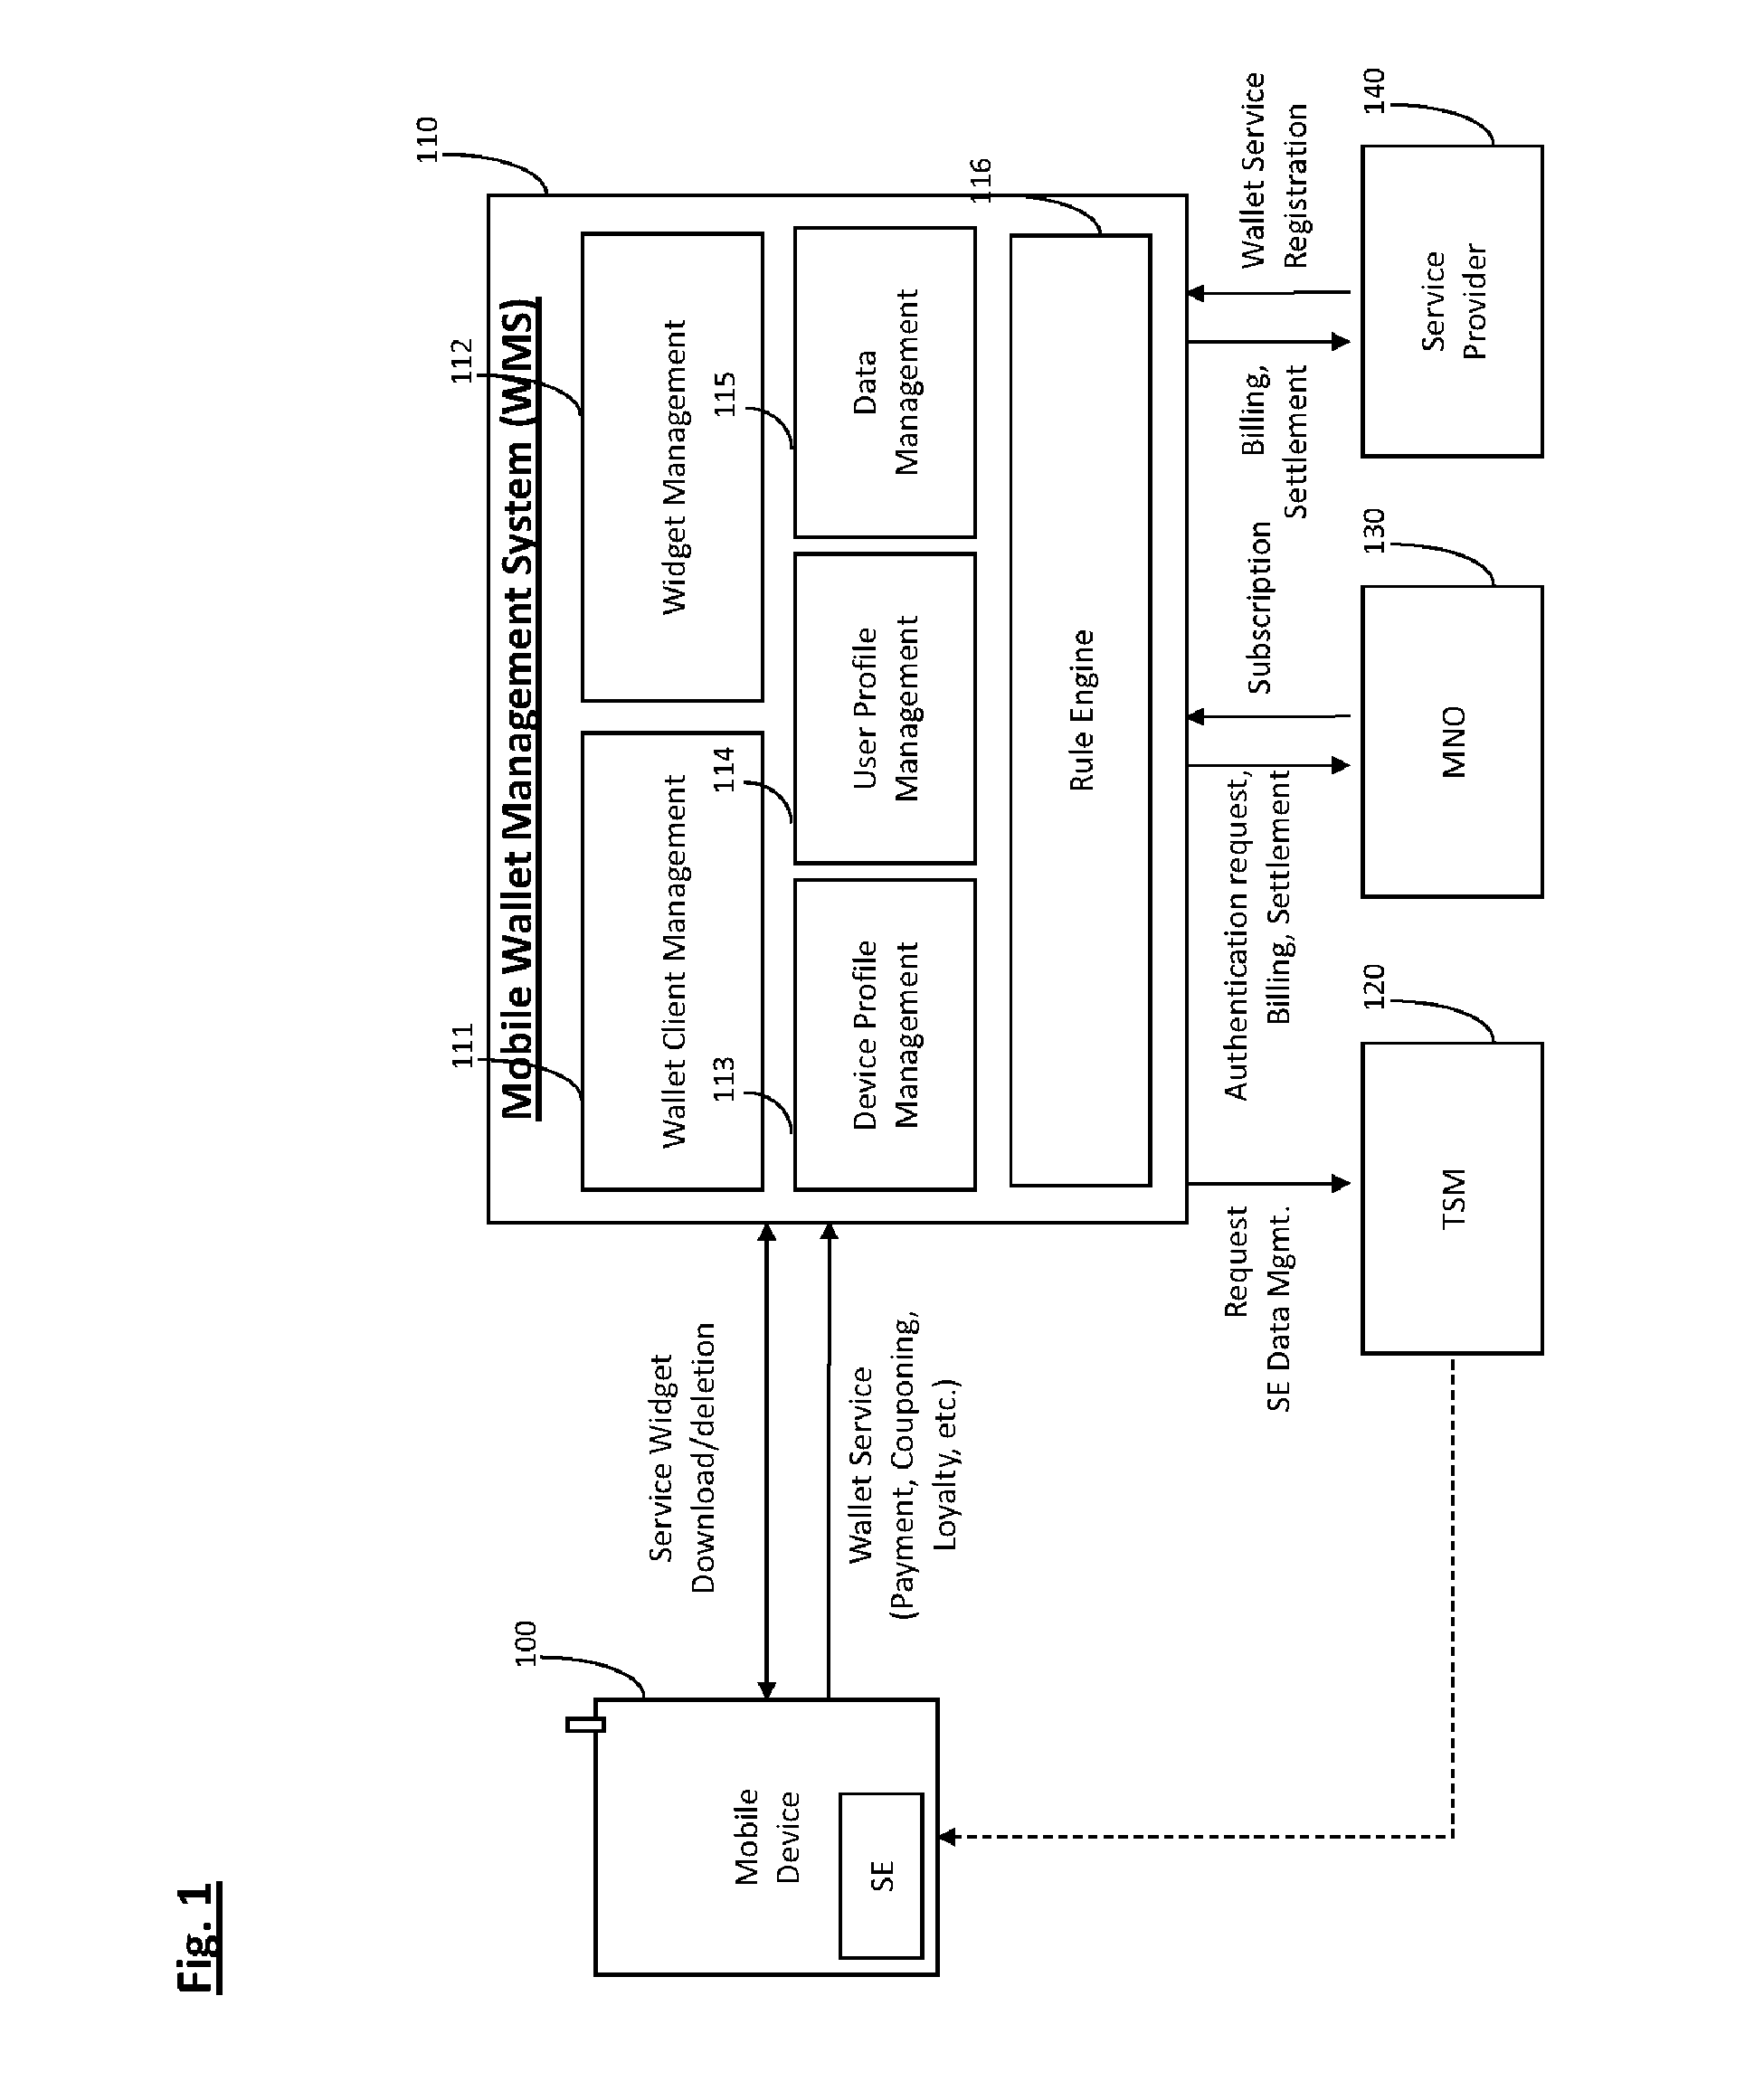 System and method for managing mobile wallet and its related credentials